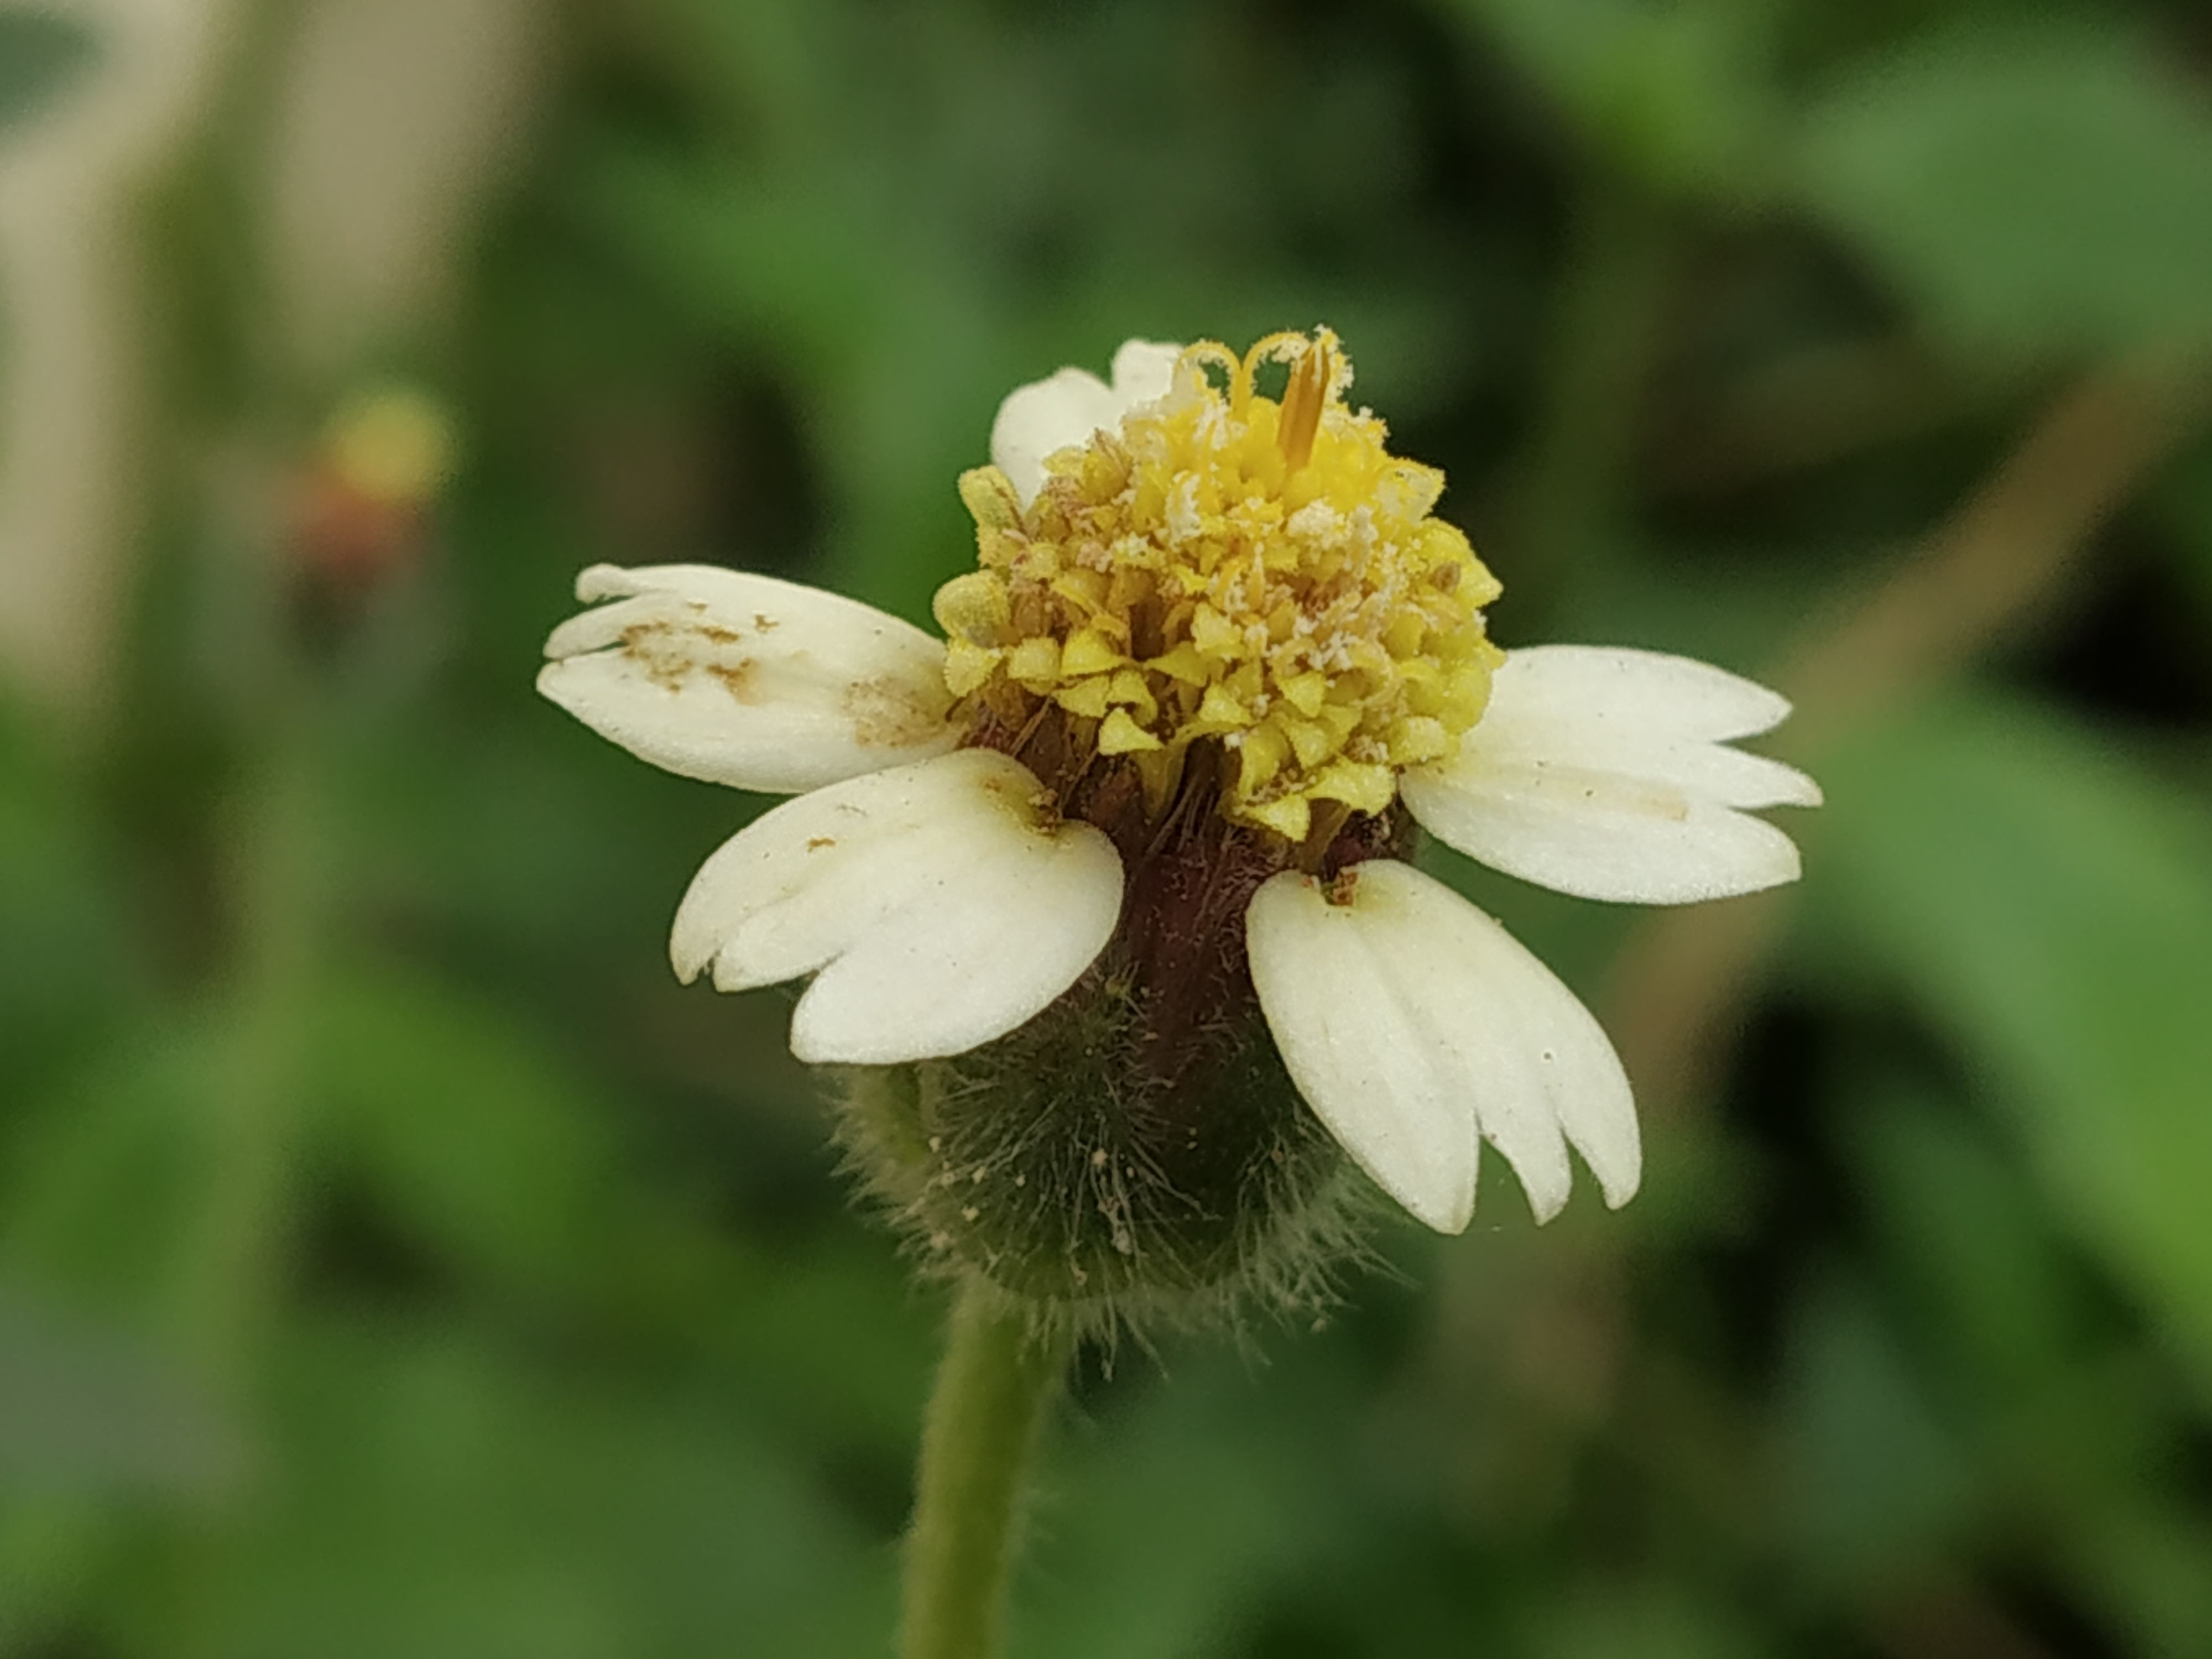 A Small Flower